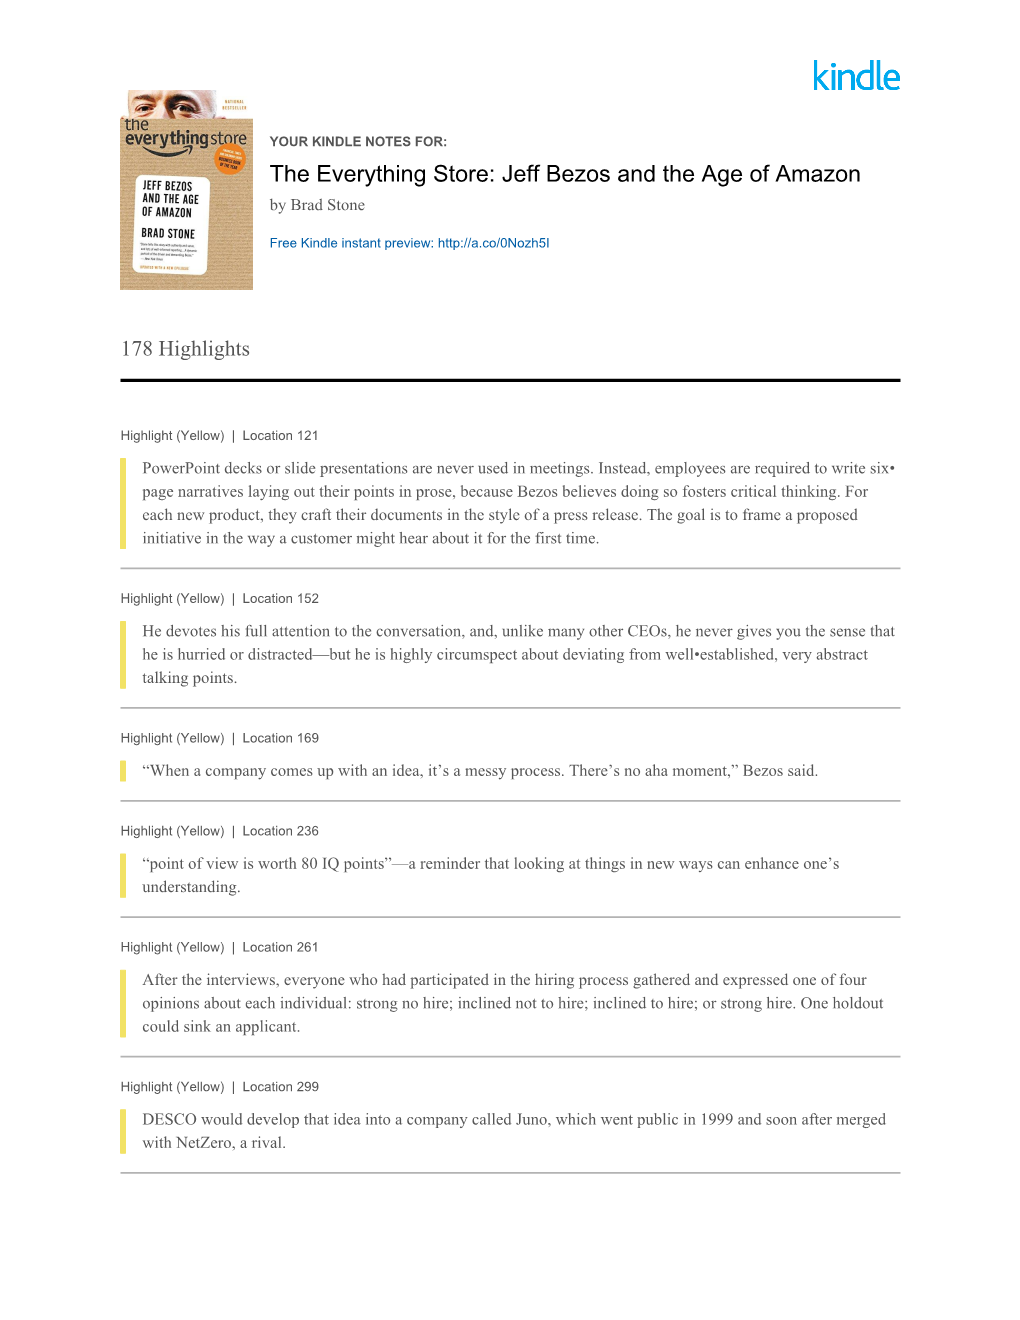 YOUR KINDLE NOTES FOR: the Everything Store: Jeff Bezos and the Age of Amazon by Brad Stone